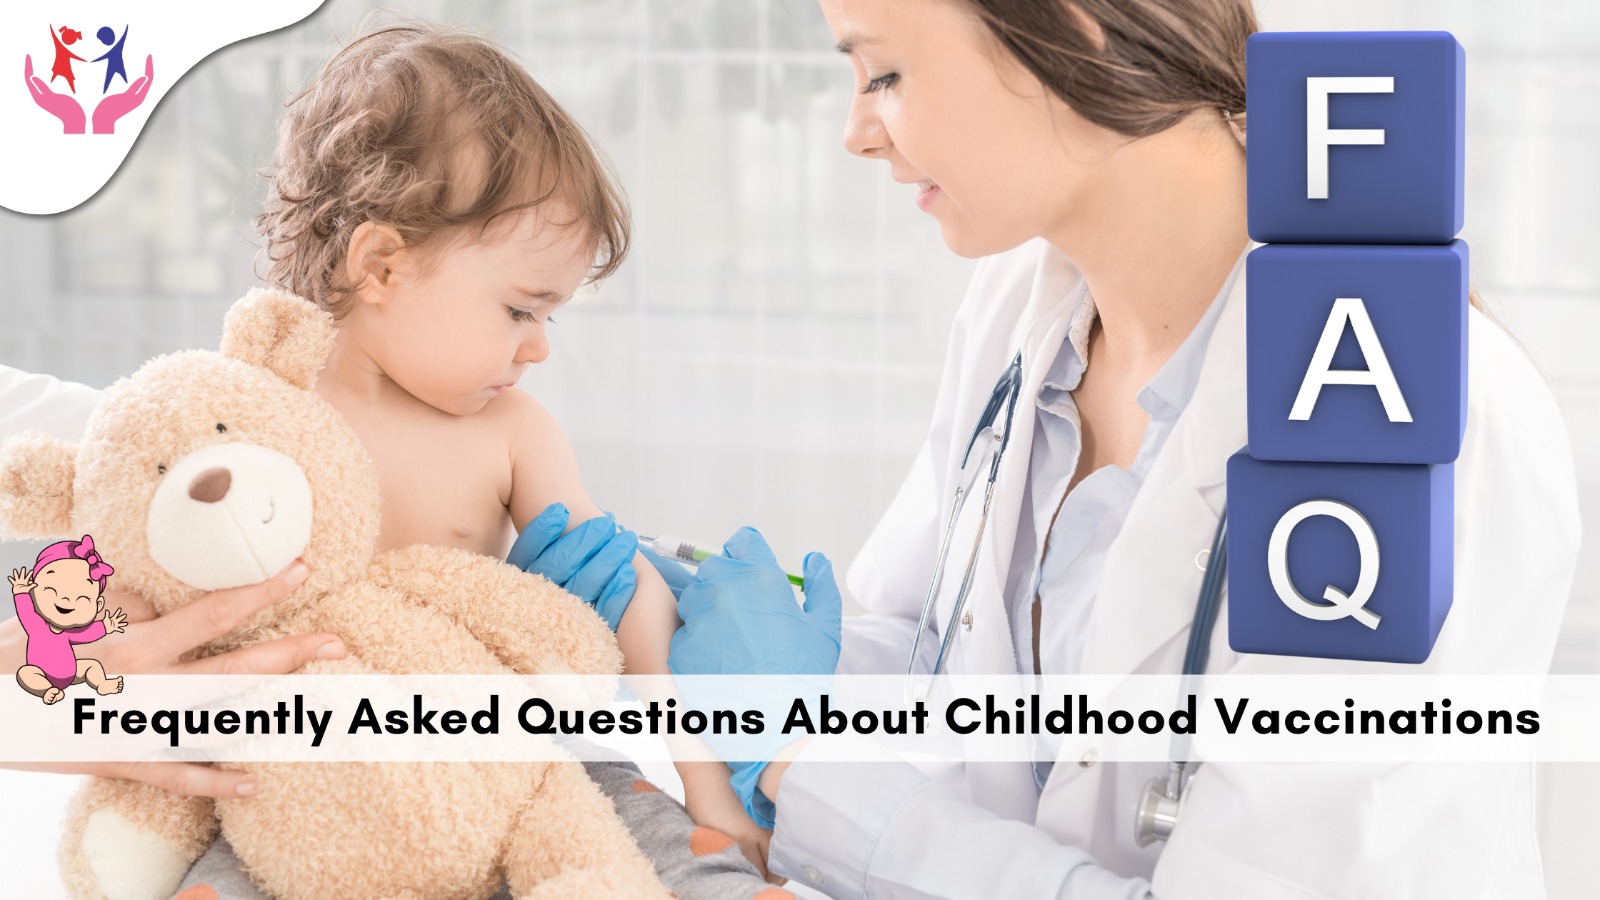 Frequently Asked Questions About Childhood Vaccinations